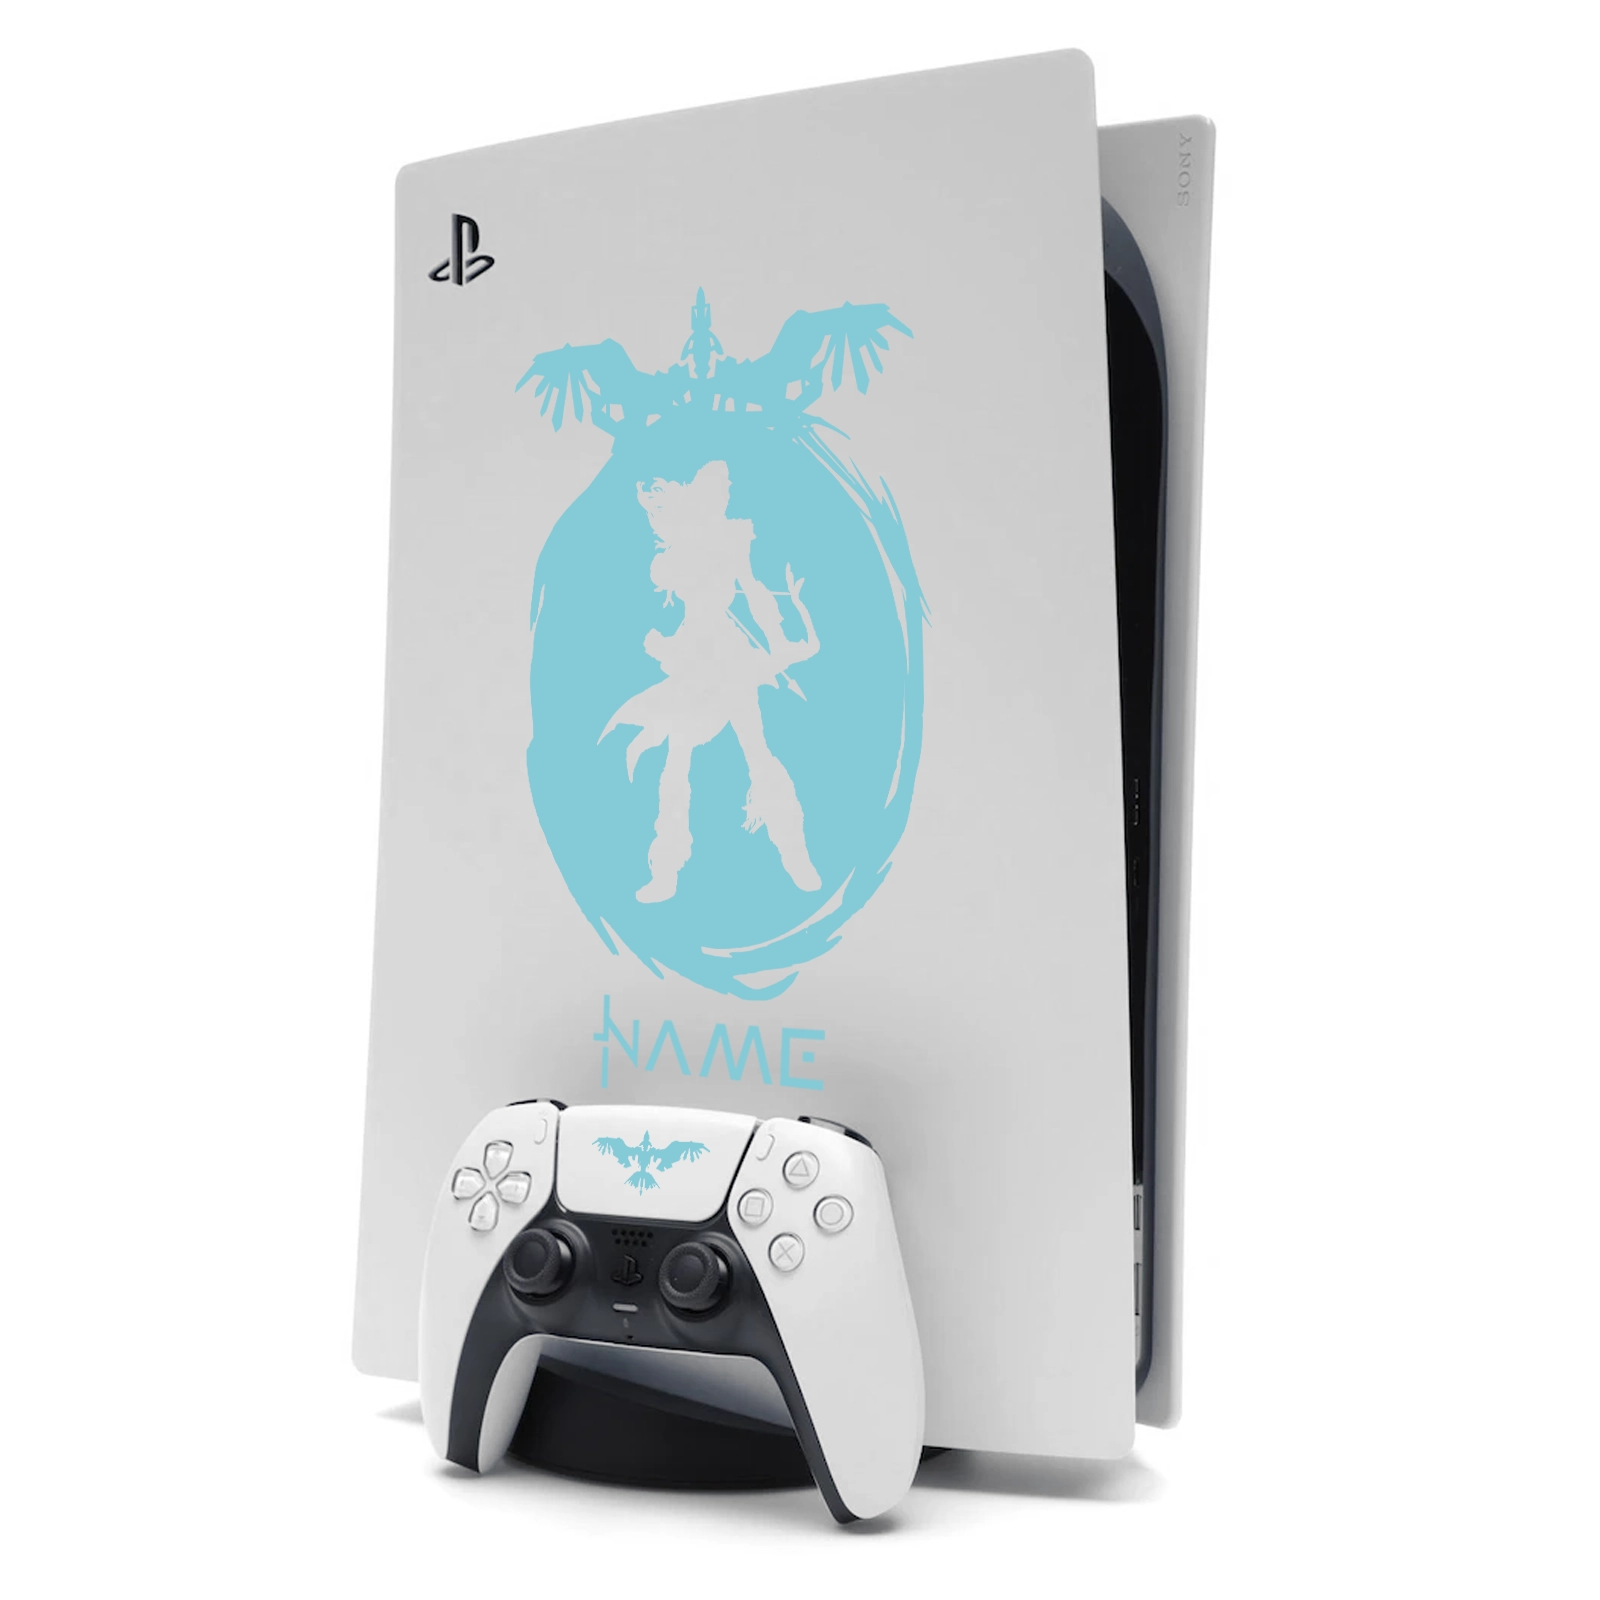 Horizon Aloy PS5 Sticker Skin for Playstation 5 in Light Blue